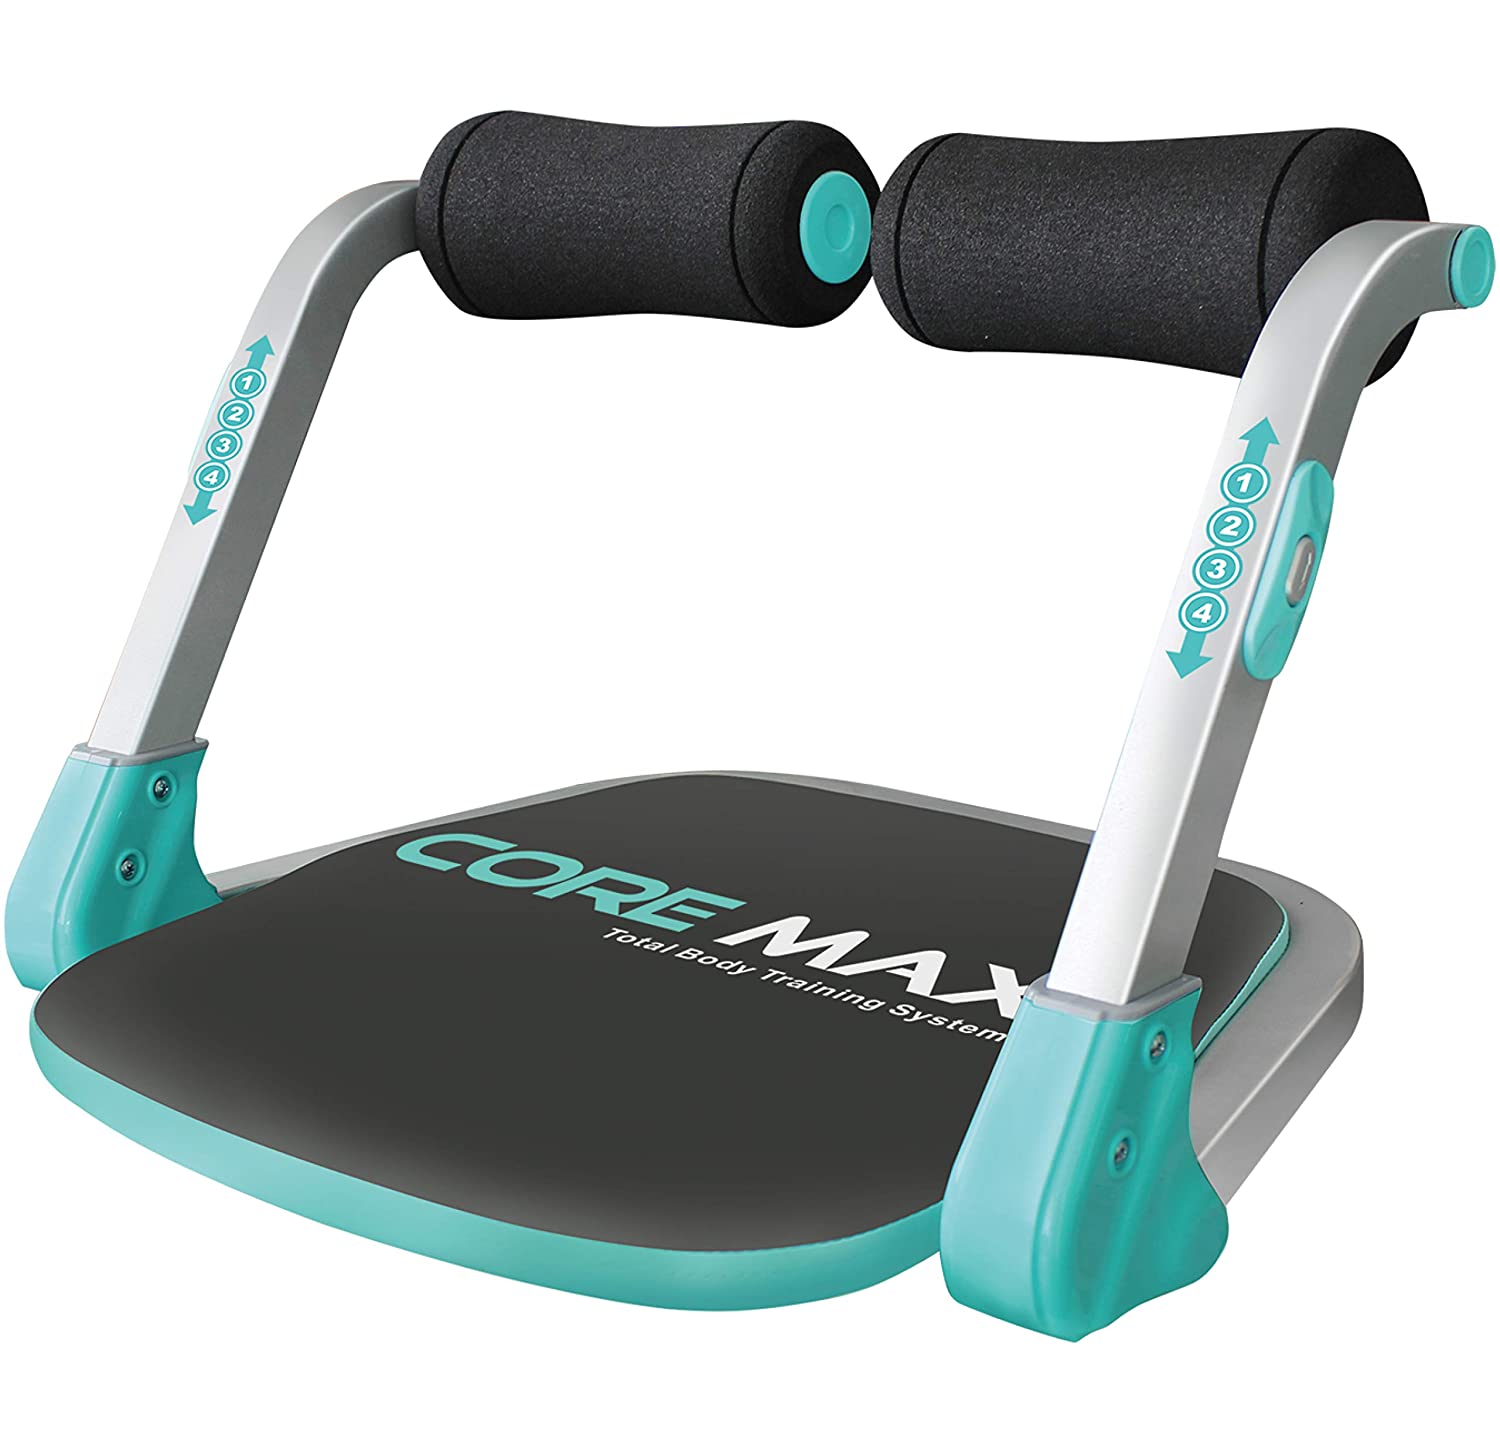 Do you need an ABS Exercise Machine to lose belly fat Quickly?